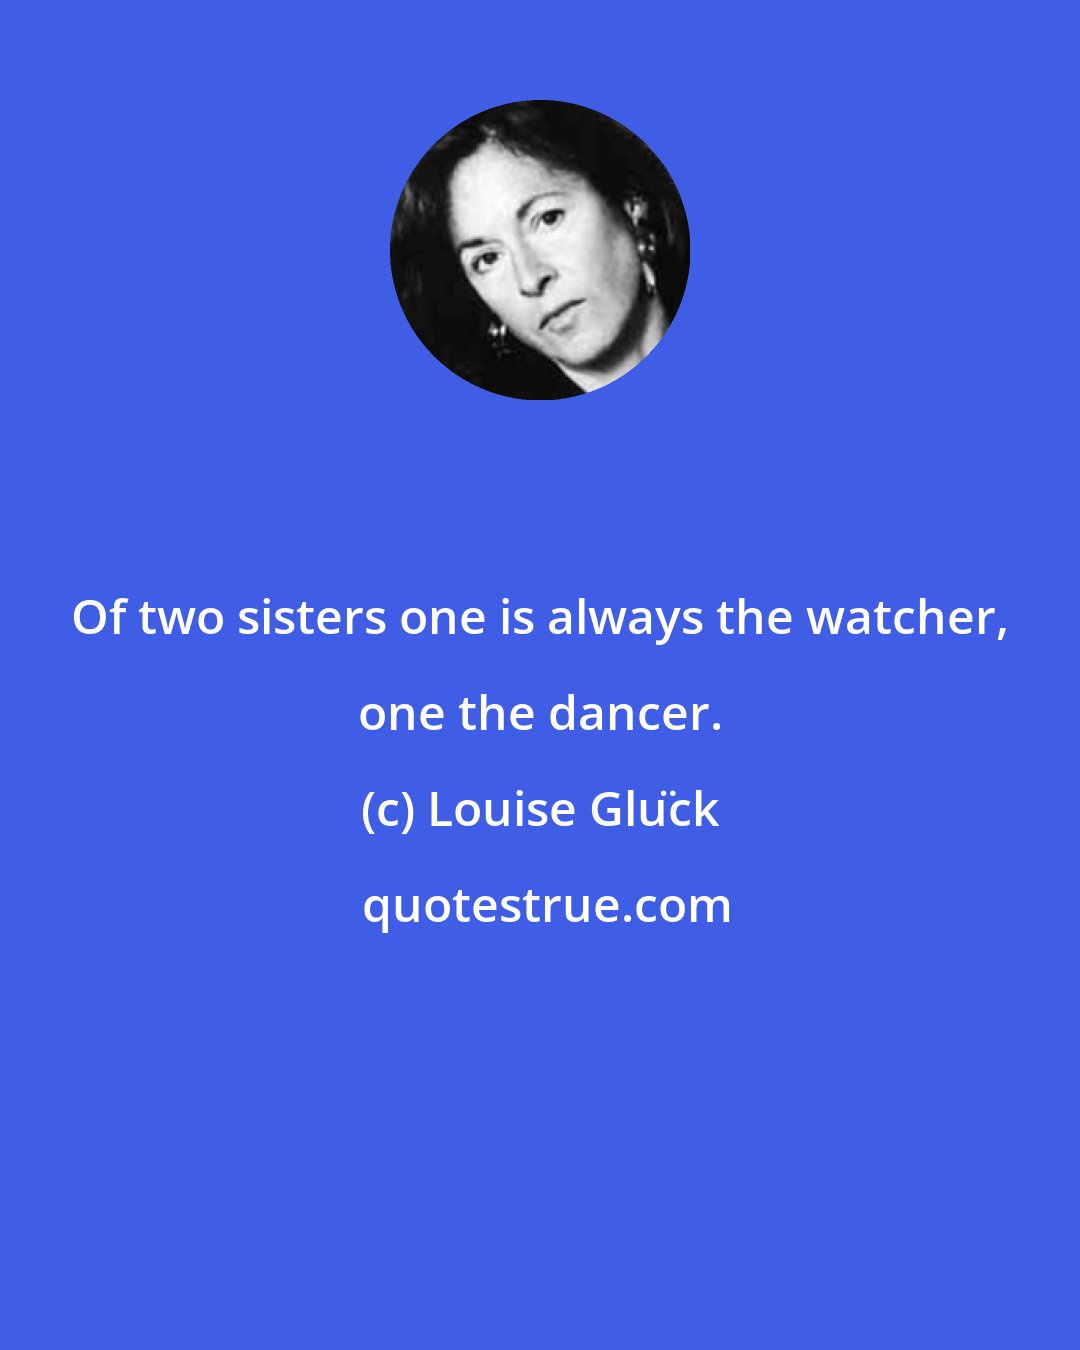 Louise Glück: Of two sisters one is always the watcher, one the dancer.